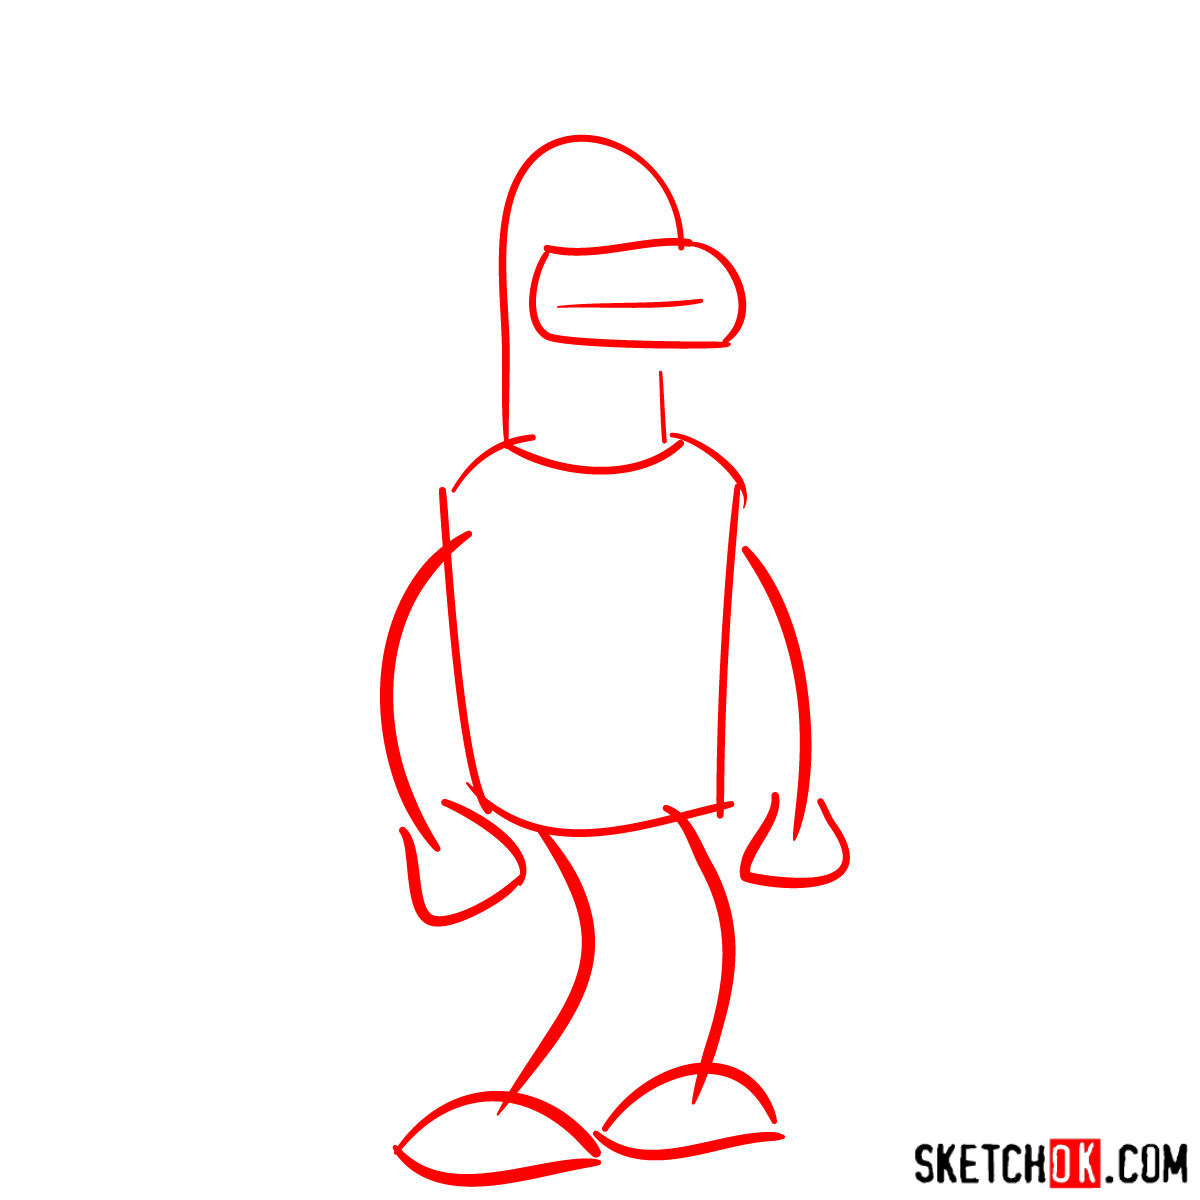 How to draw Bender Rodríguez - step 01